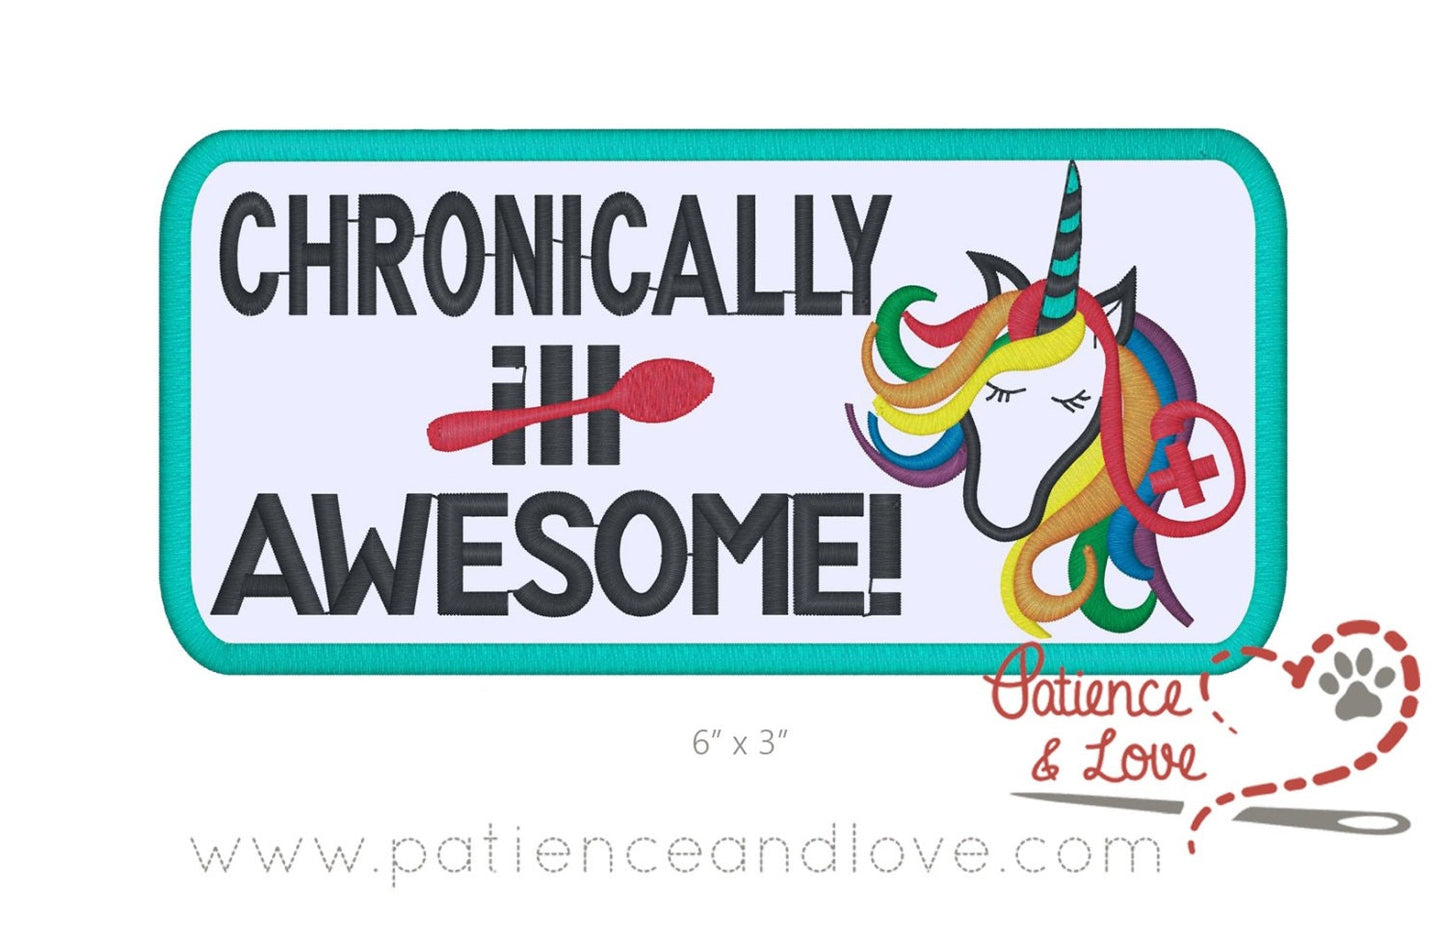 Chronically awesome, medical rainbow unicorn and ill crossed out with a spoon, 6x3 inch rectangular patch